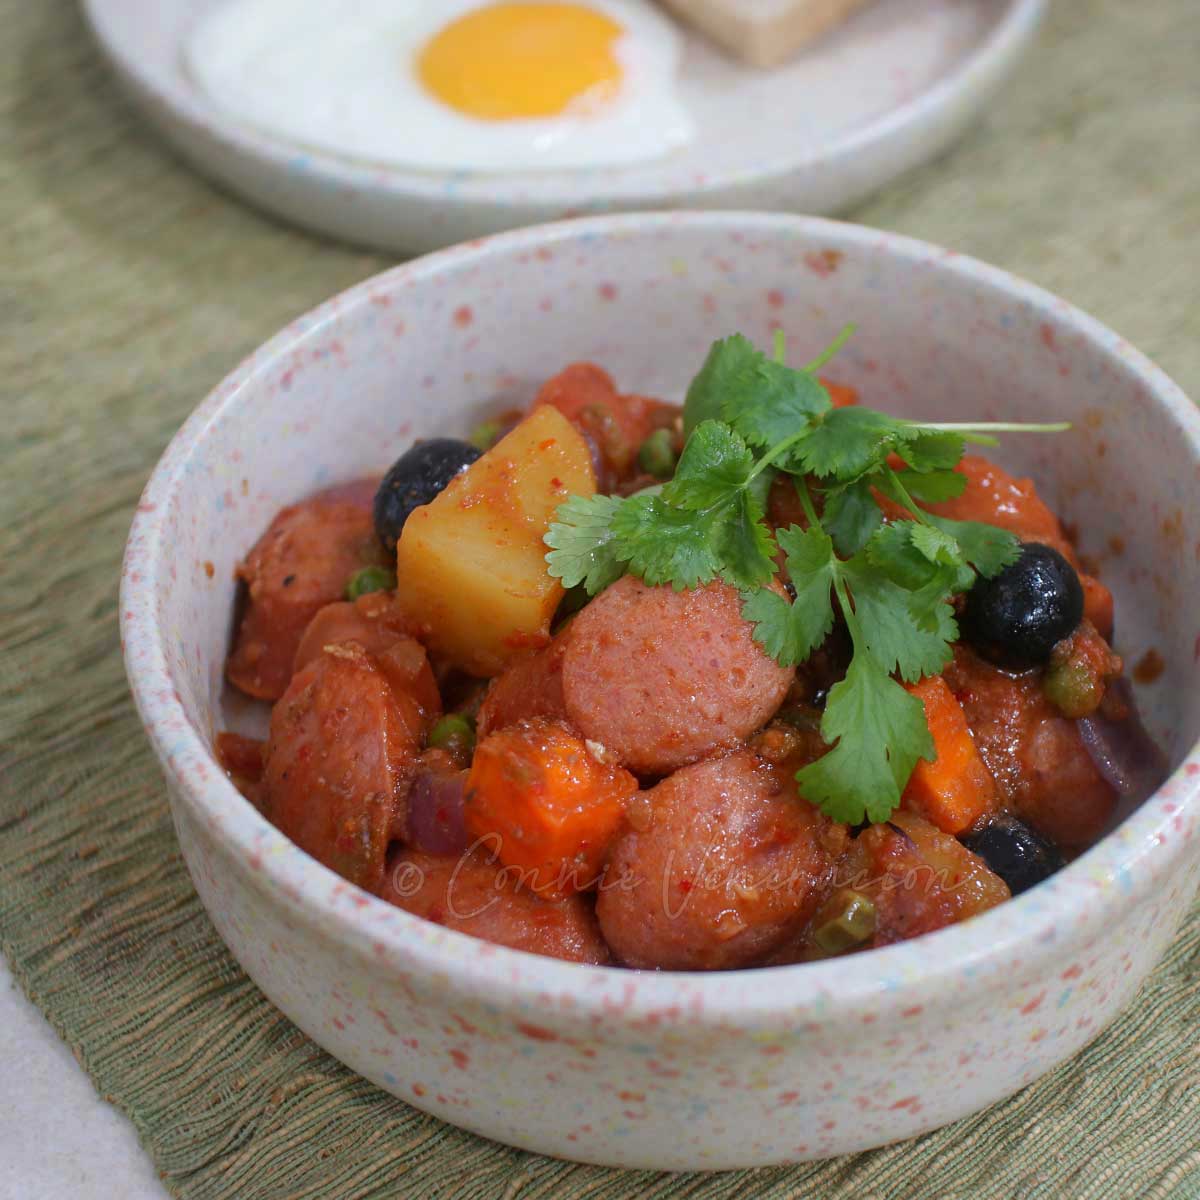 Sausage and vegetable stew cooked with holiday leftovers